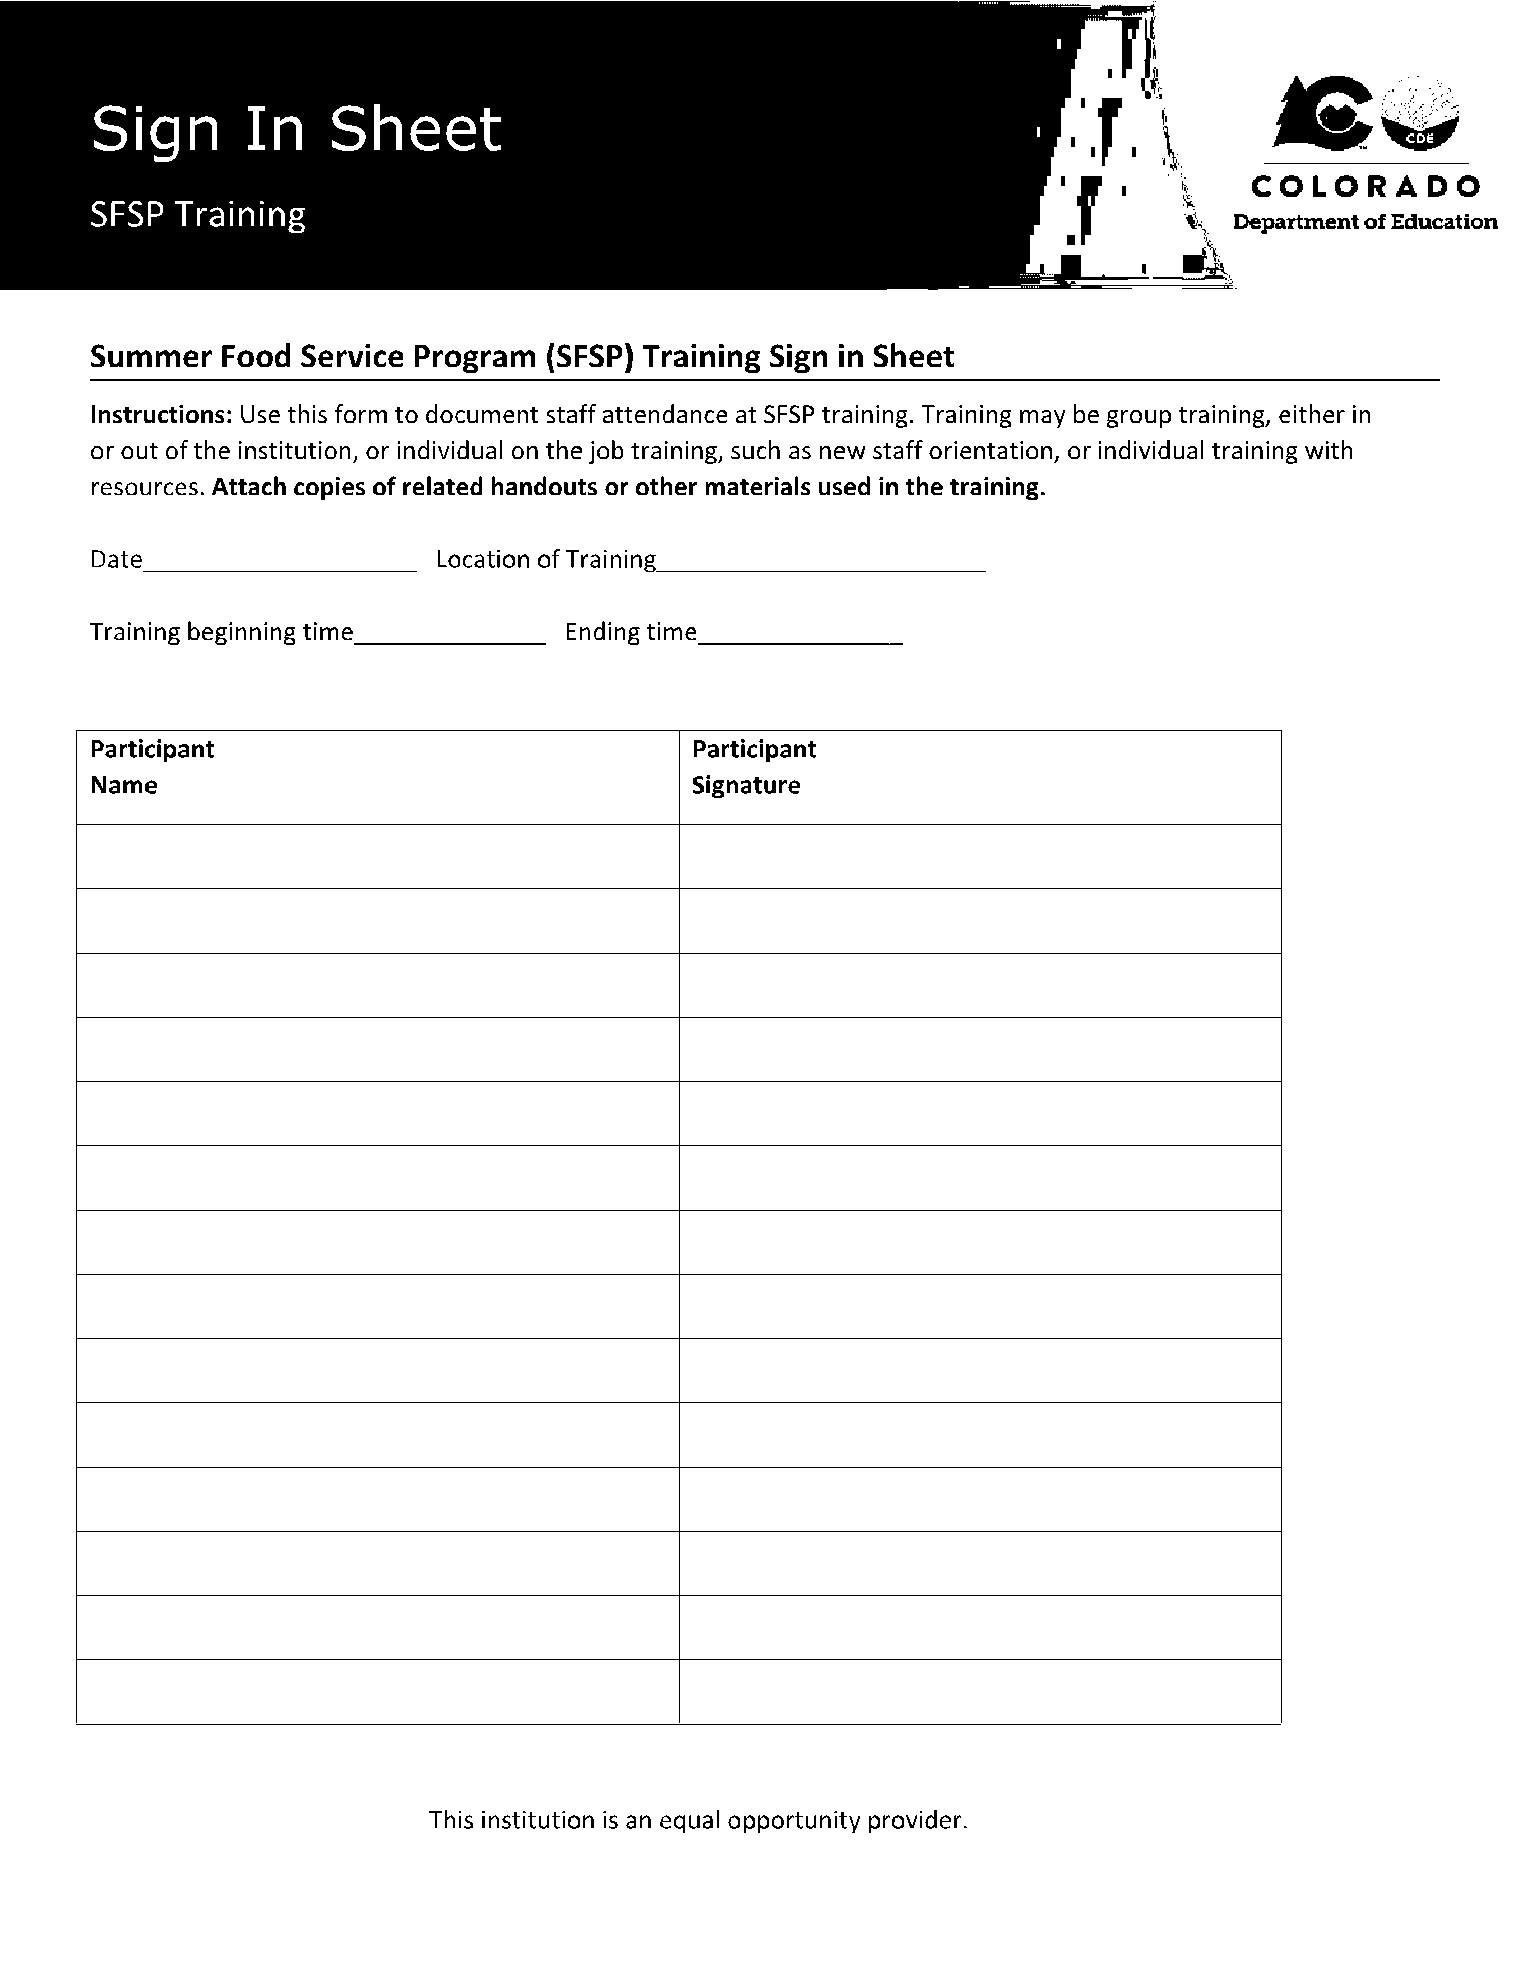 Sign in Sheet Templates for Training